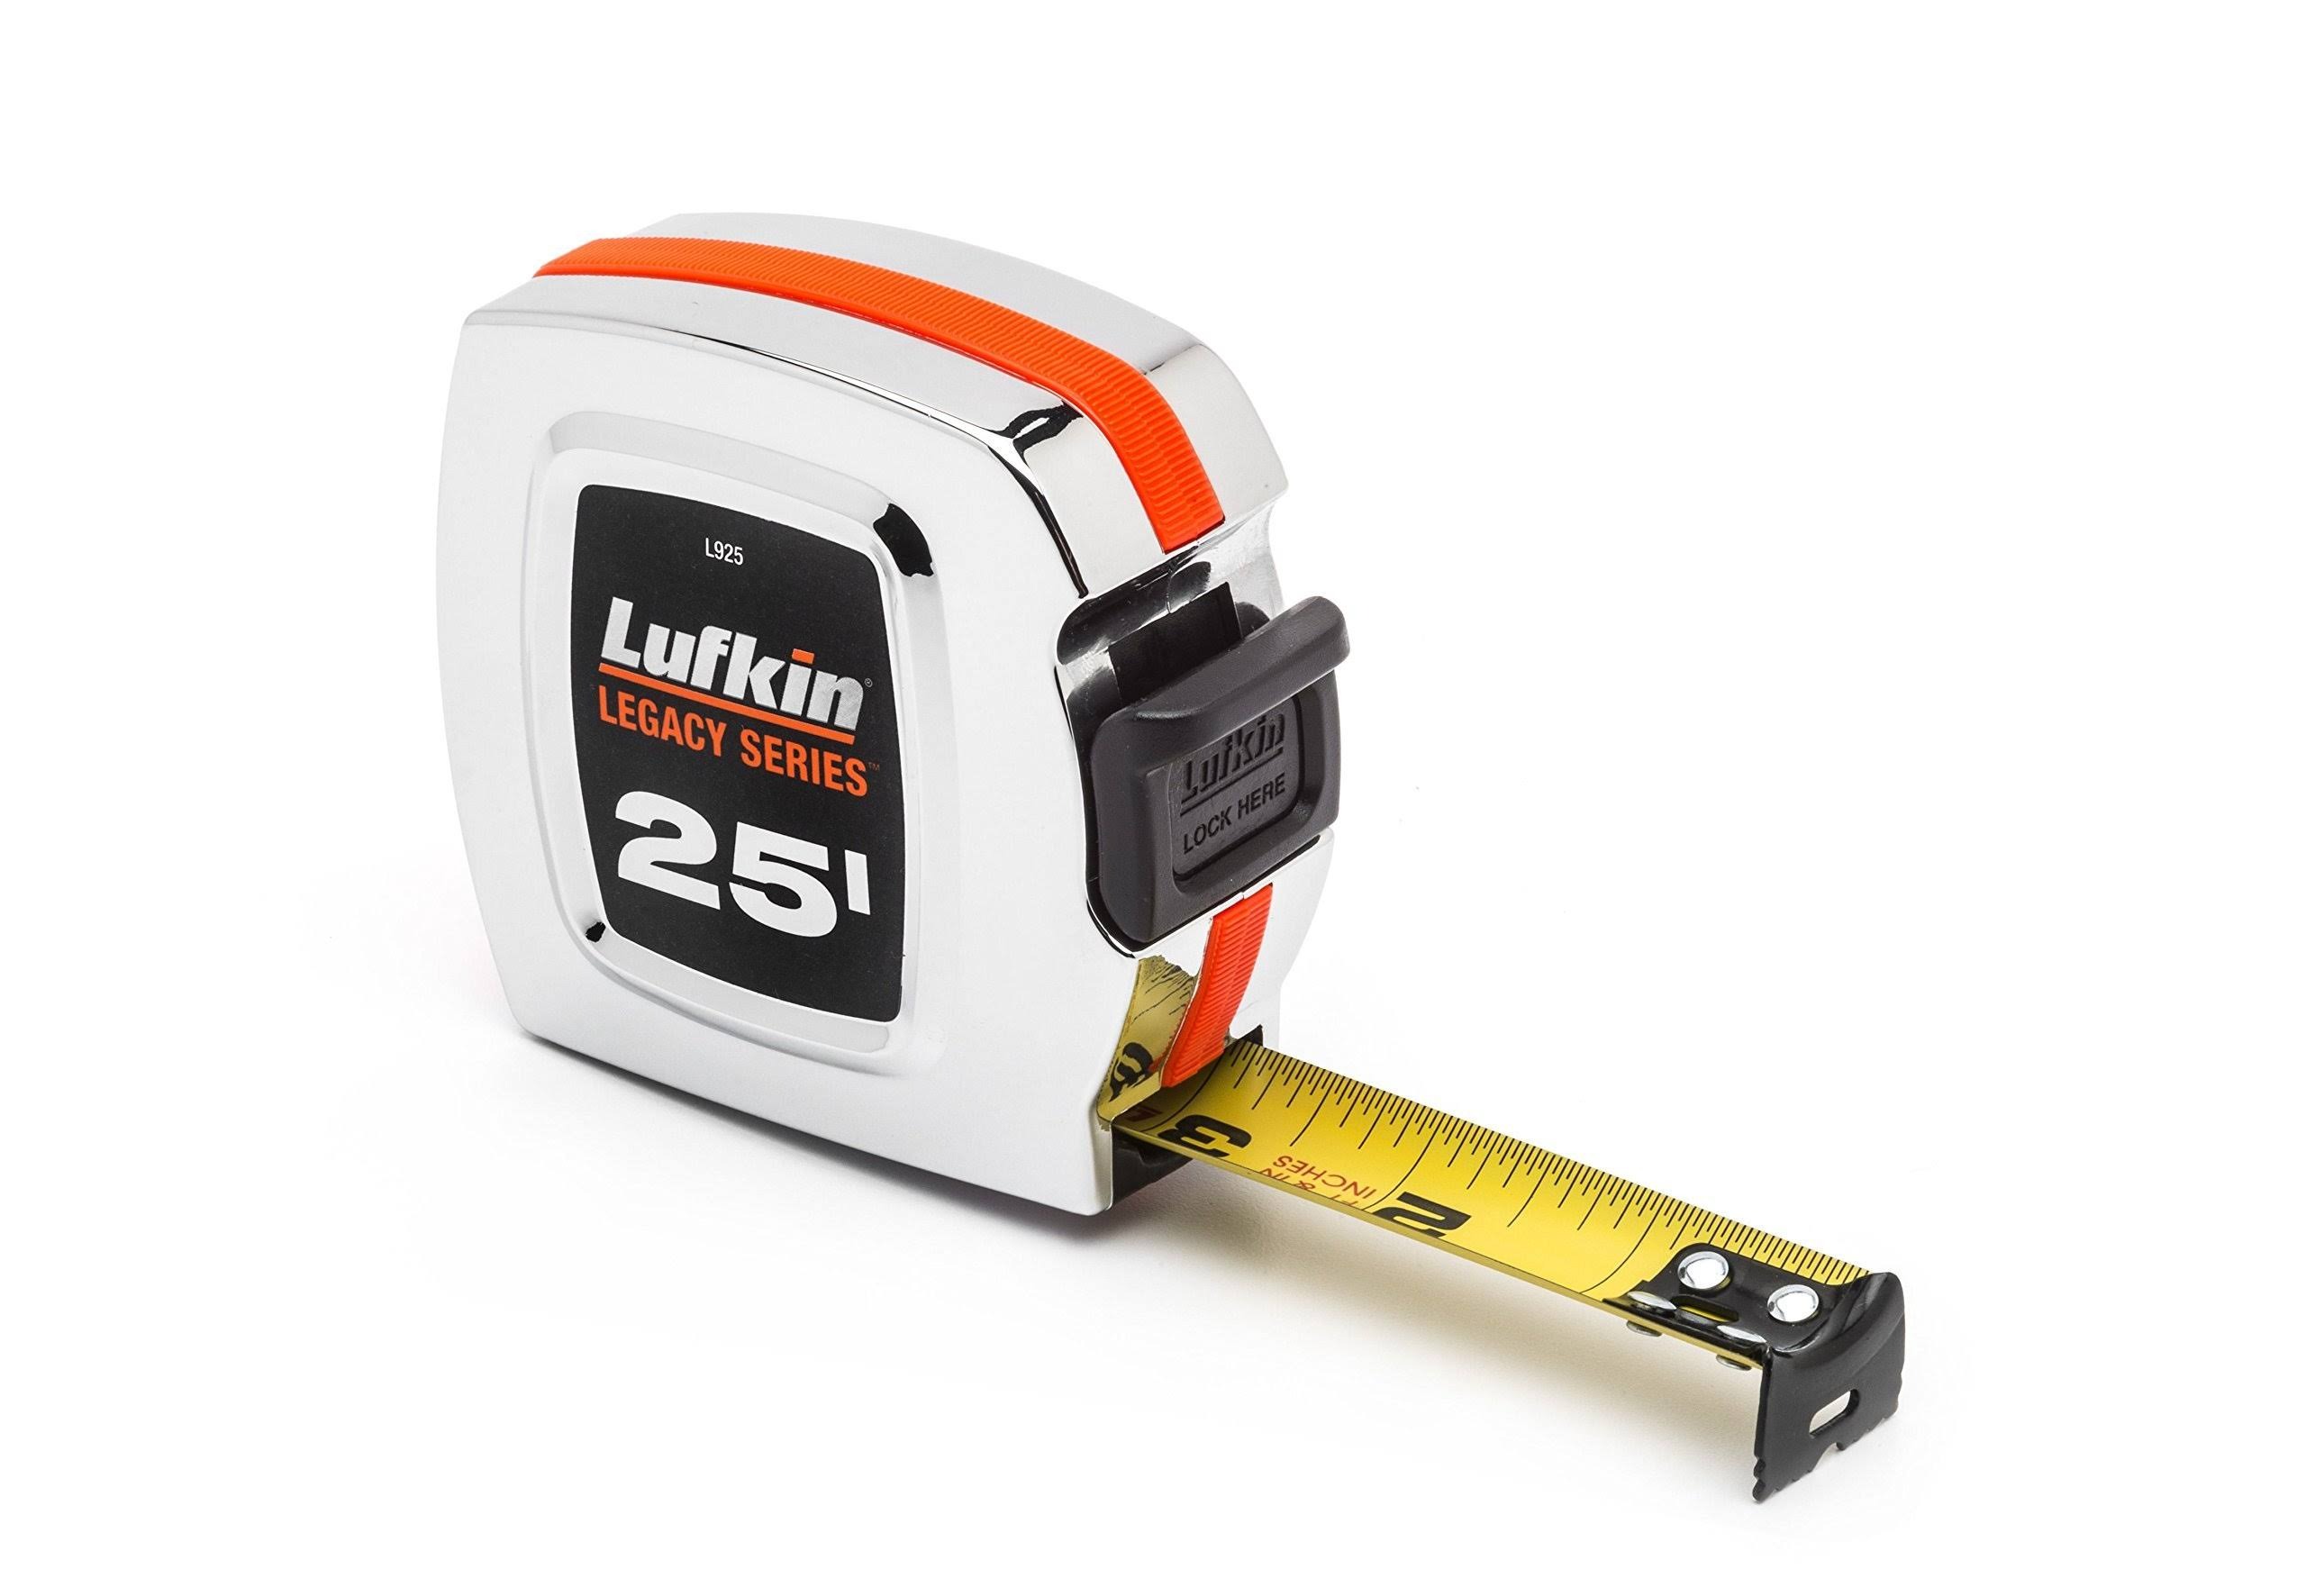 25' Lufkin Legacy Series Tape Measure (L925) $3 + 2.5% Slickdeals Cashback (P/C Req'd) at Select  Ace Hardware + Free Curbside Pickup ** YMMV